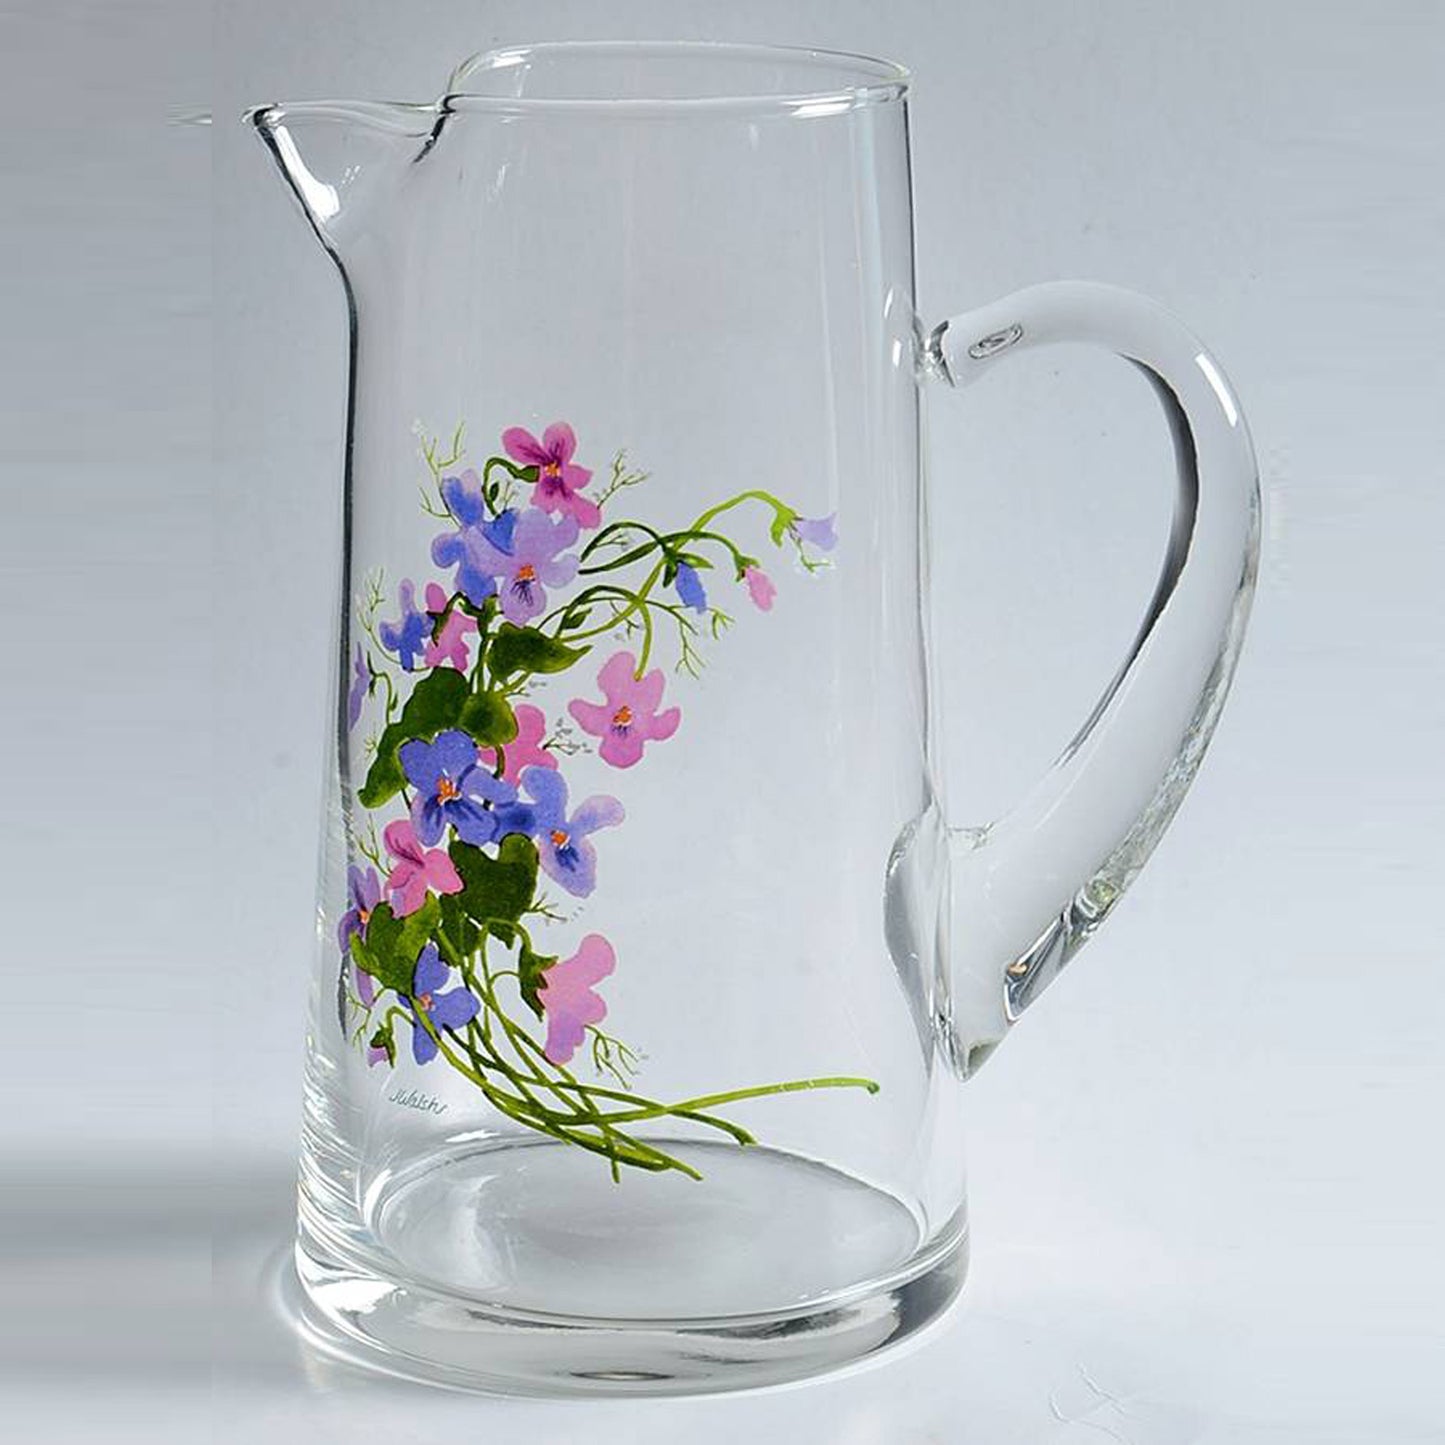 WILD VIOLETS COLLECTION By Avon Hand Painted Crystal Lemonade Pitcher Made in France 22K Gold